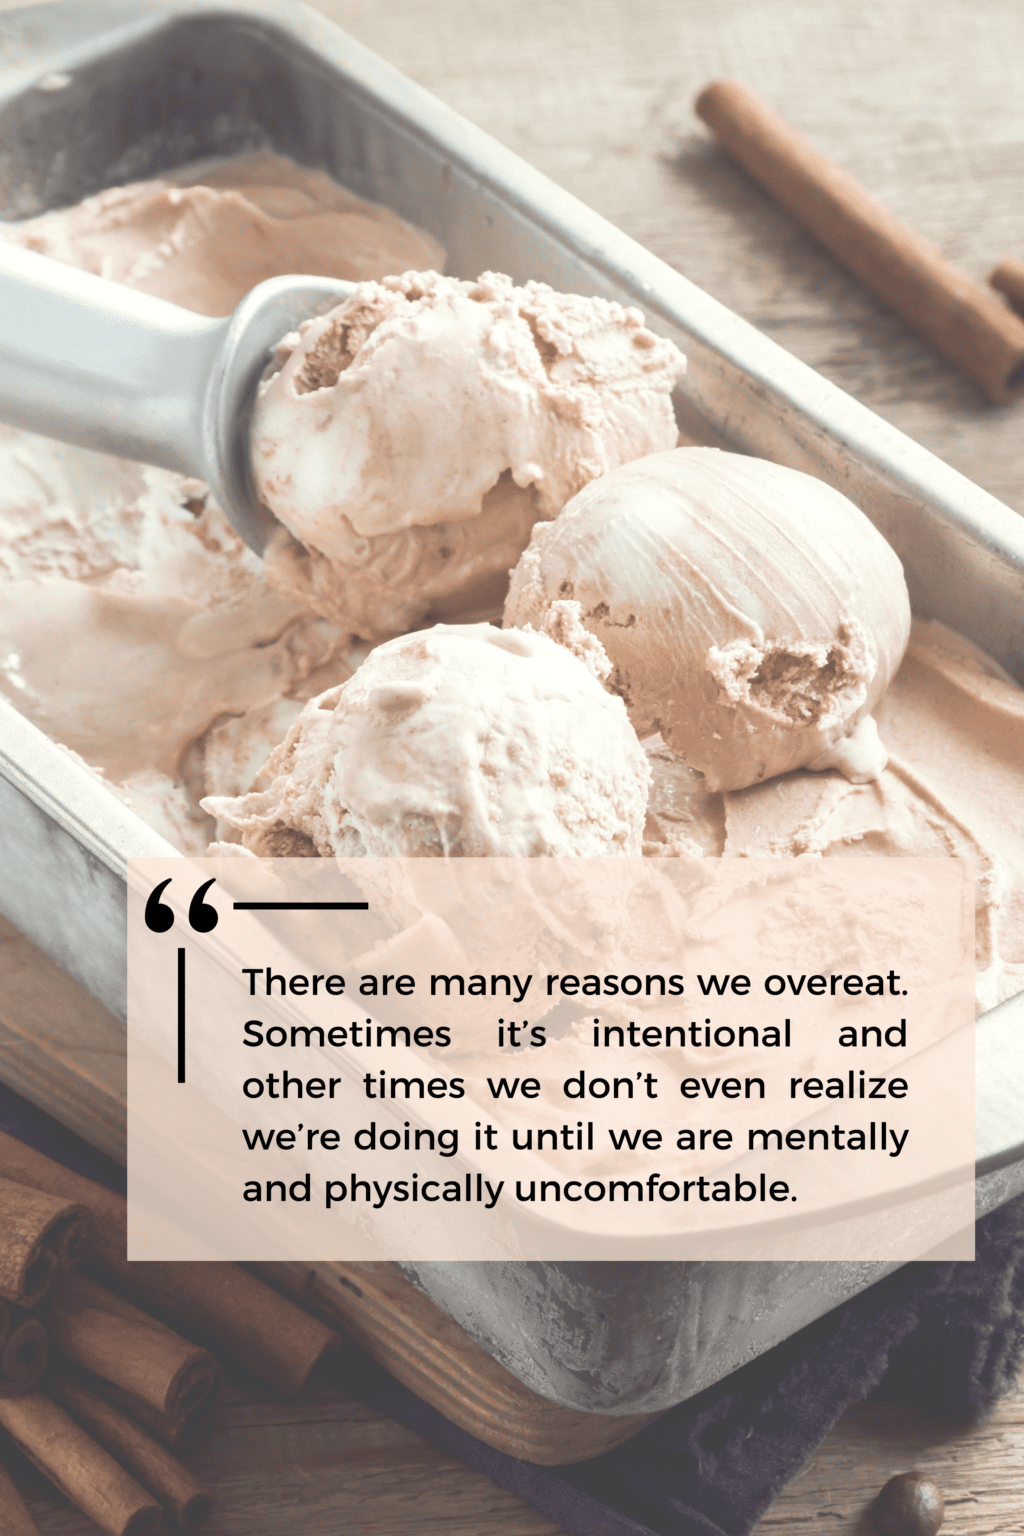 An image of ice cream in a metal tray being scooped, with the quote "there are many reasons we overeat. Sometimes it's intentional and other times we don't even realize we're doing it until we are mentally and physically uncomfortable".